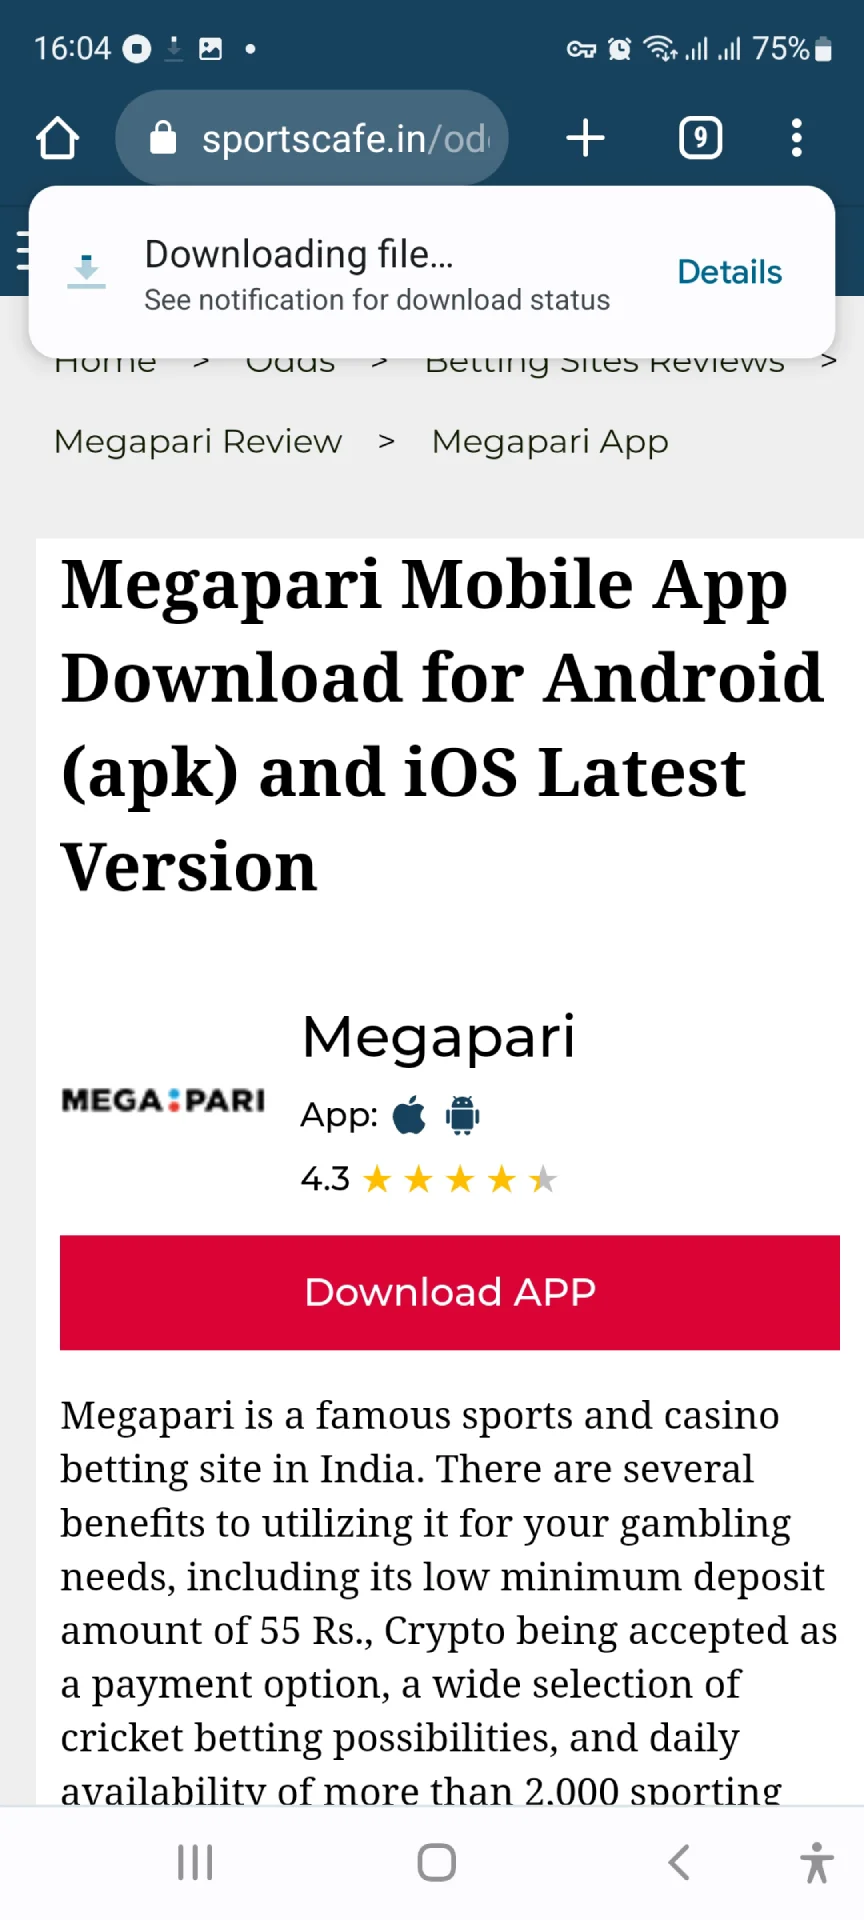 Check your security settings to install the Megapari app.